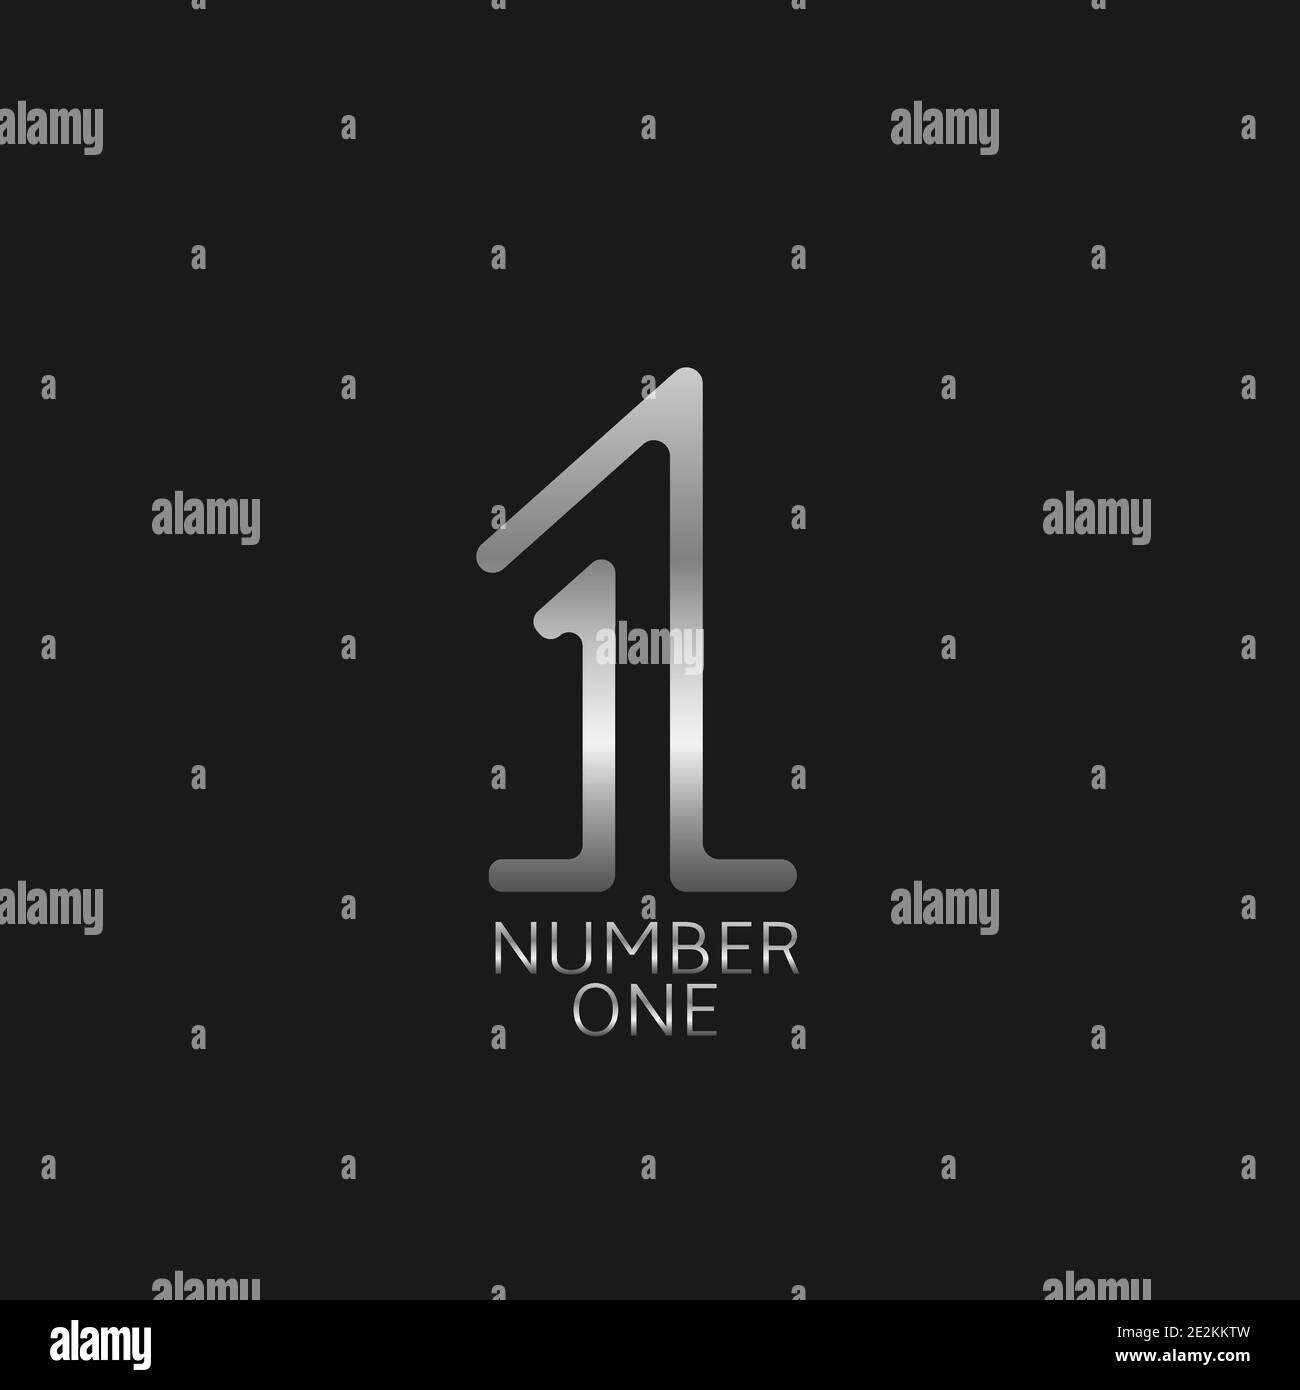 Number one icon Stock Vector